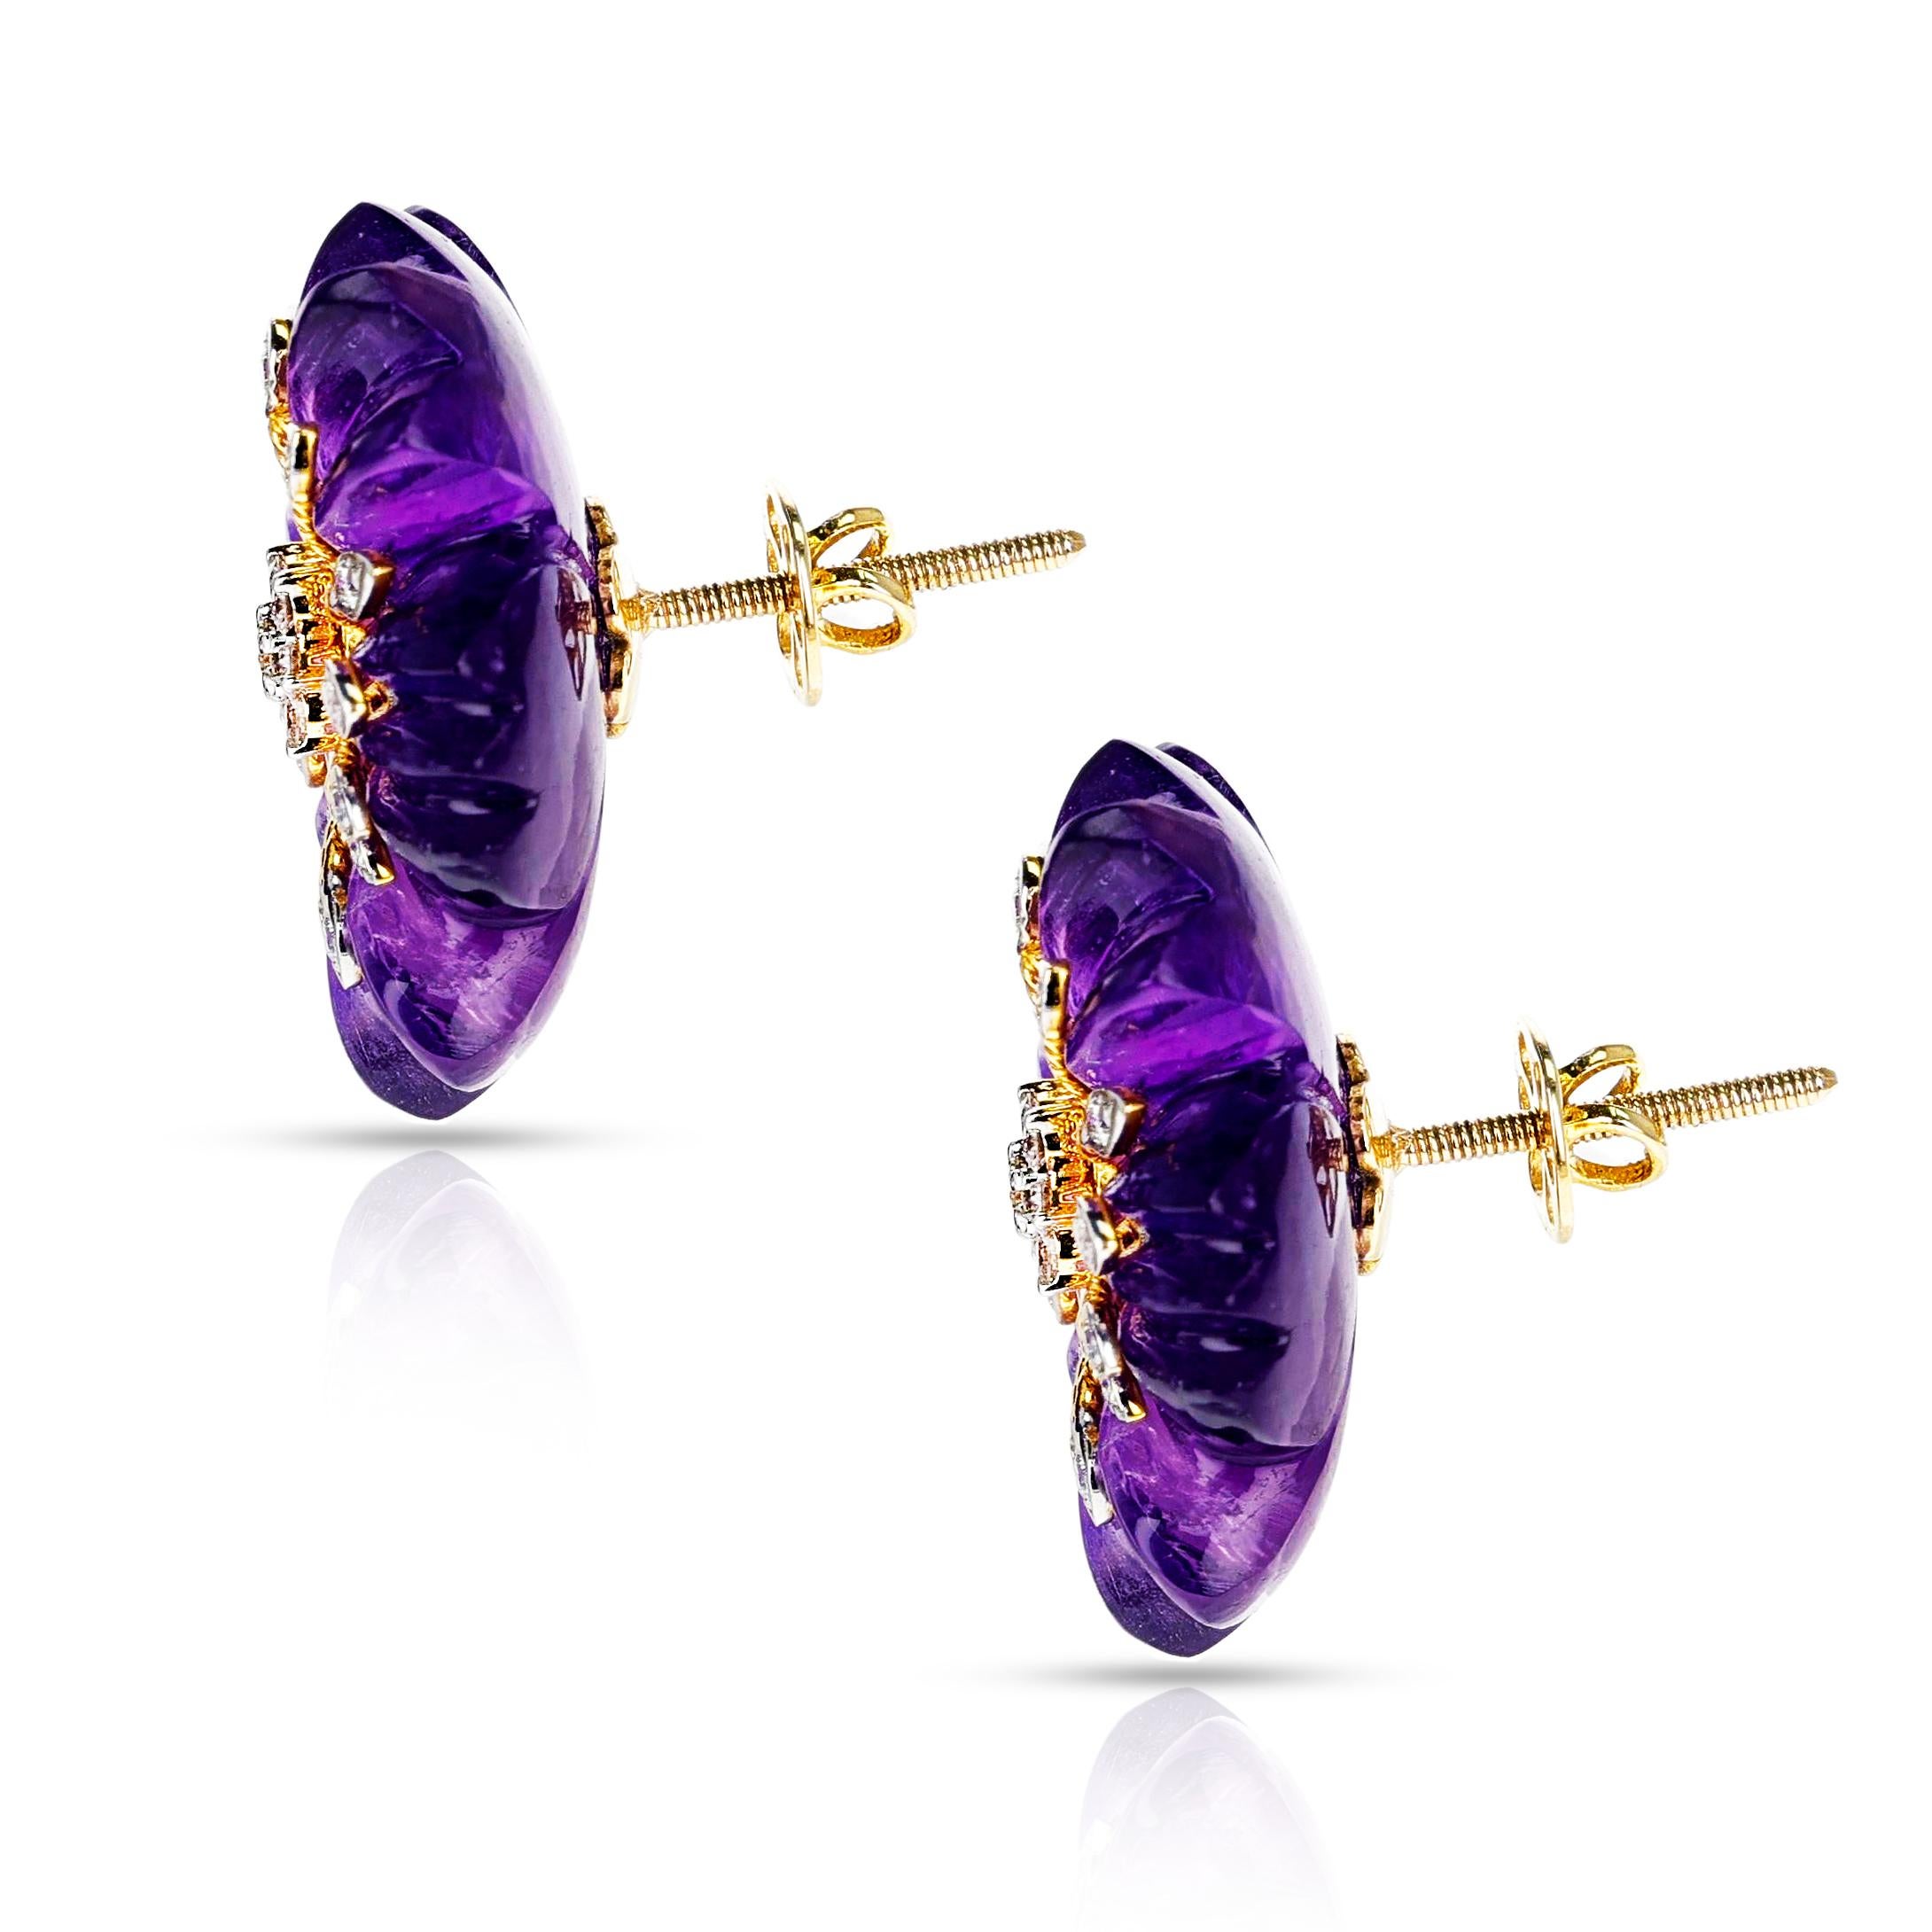 Round Cut Carved Floral Amethyst Earrings with Diamonds, 14K